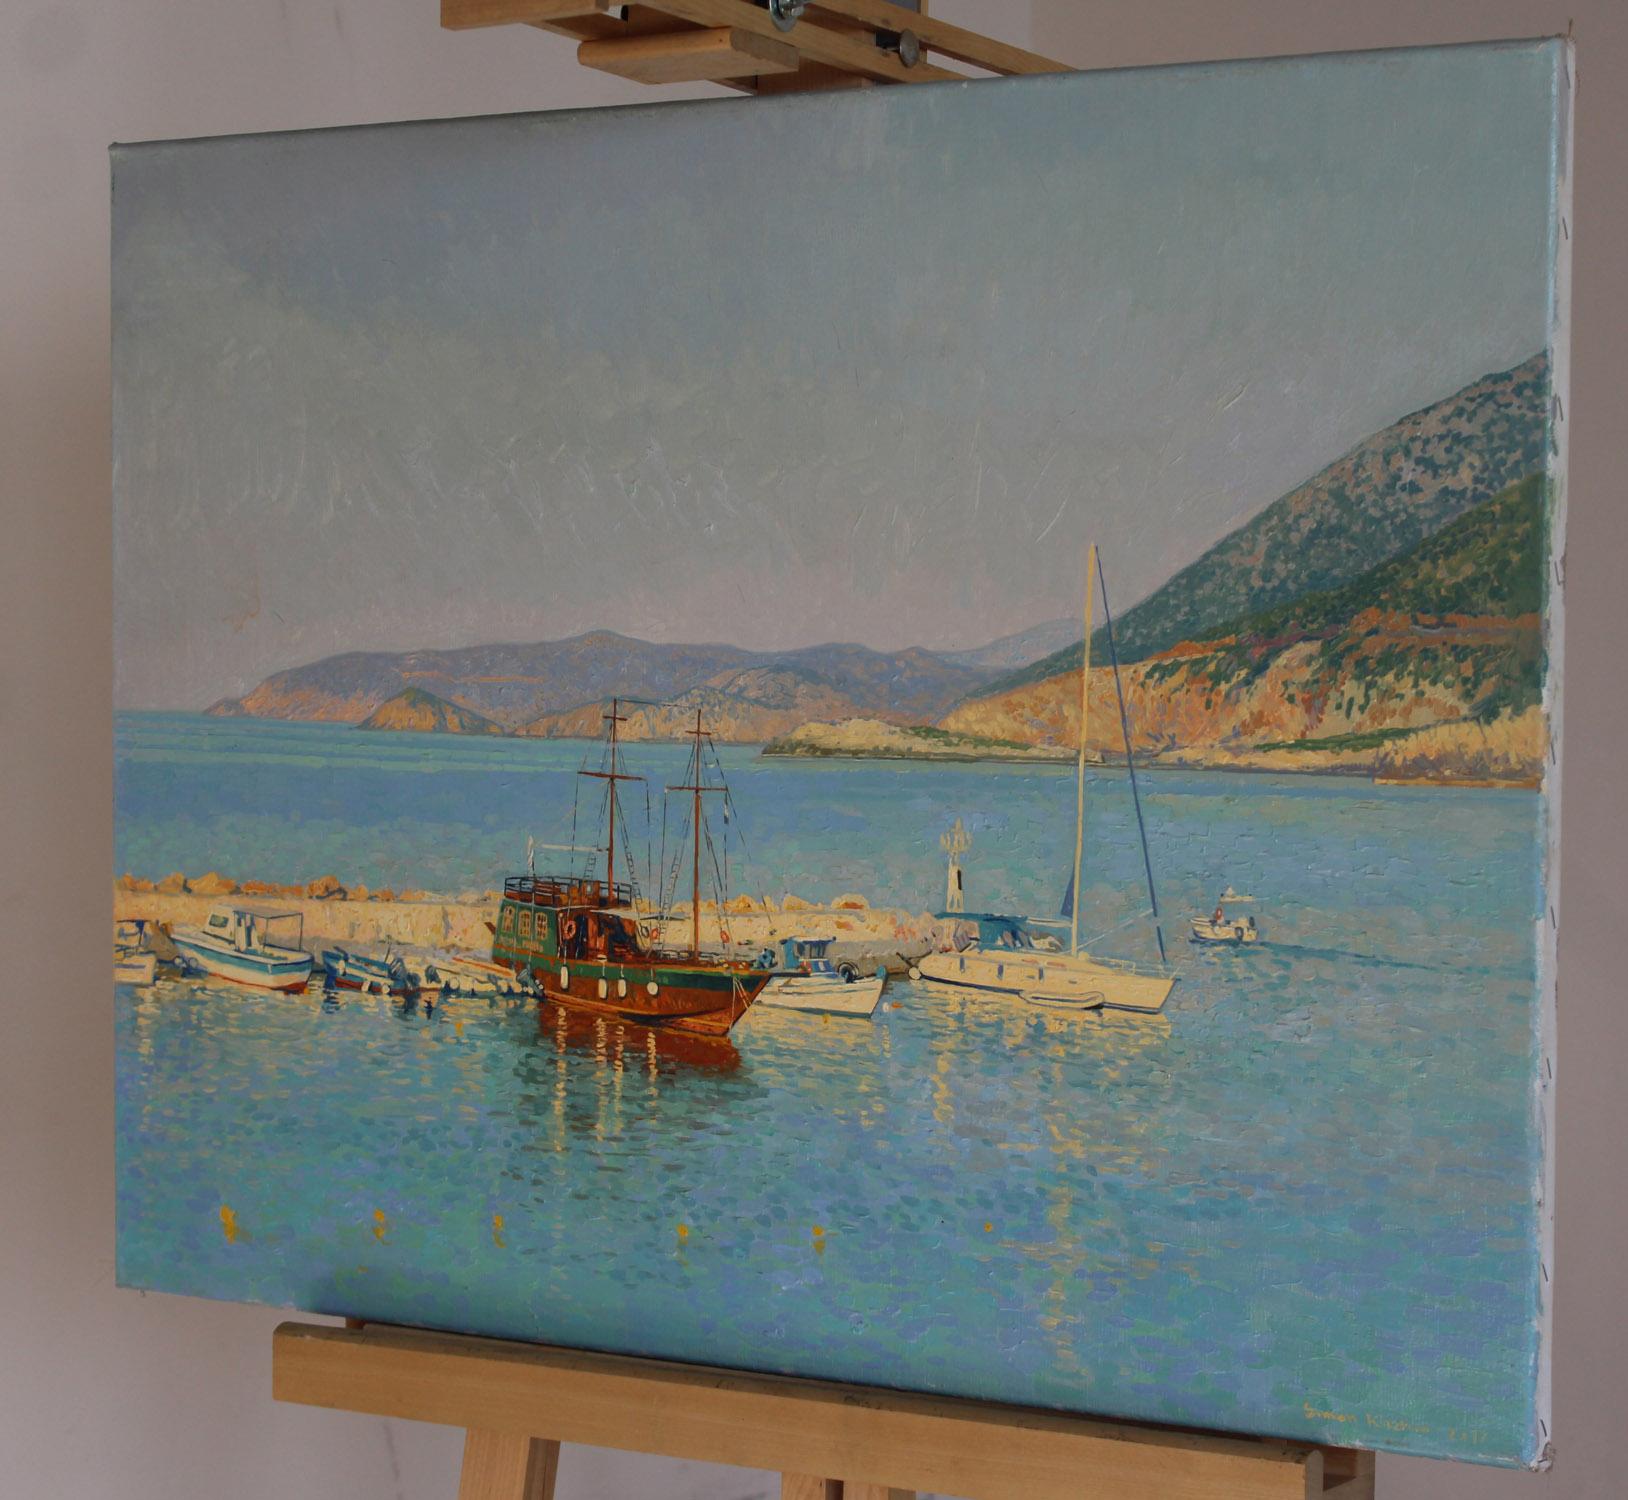 Yachts in the bay of Bali, Original Seascape Mountainscape Oil Painting, Large For Sale 1